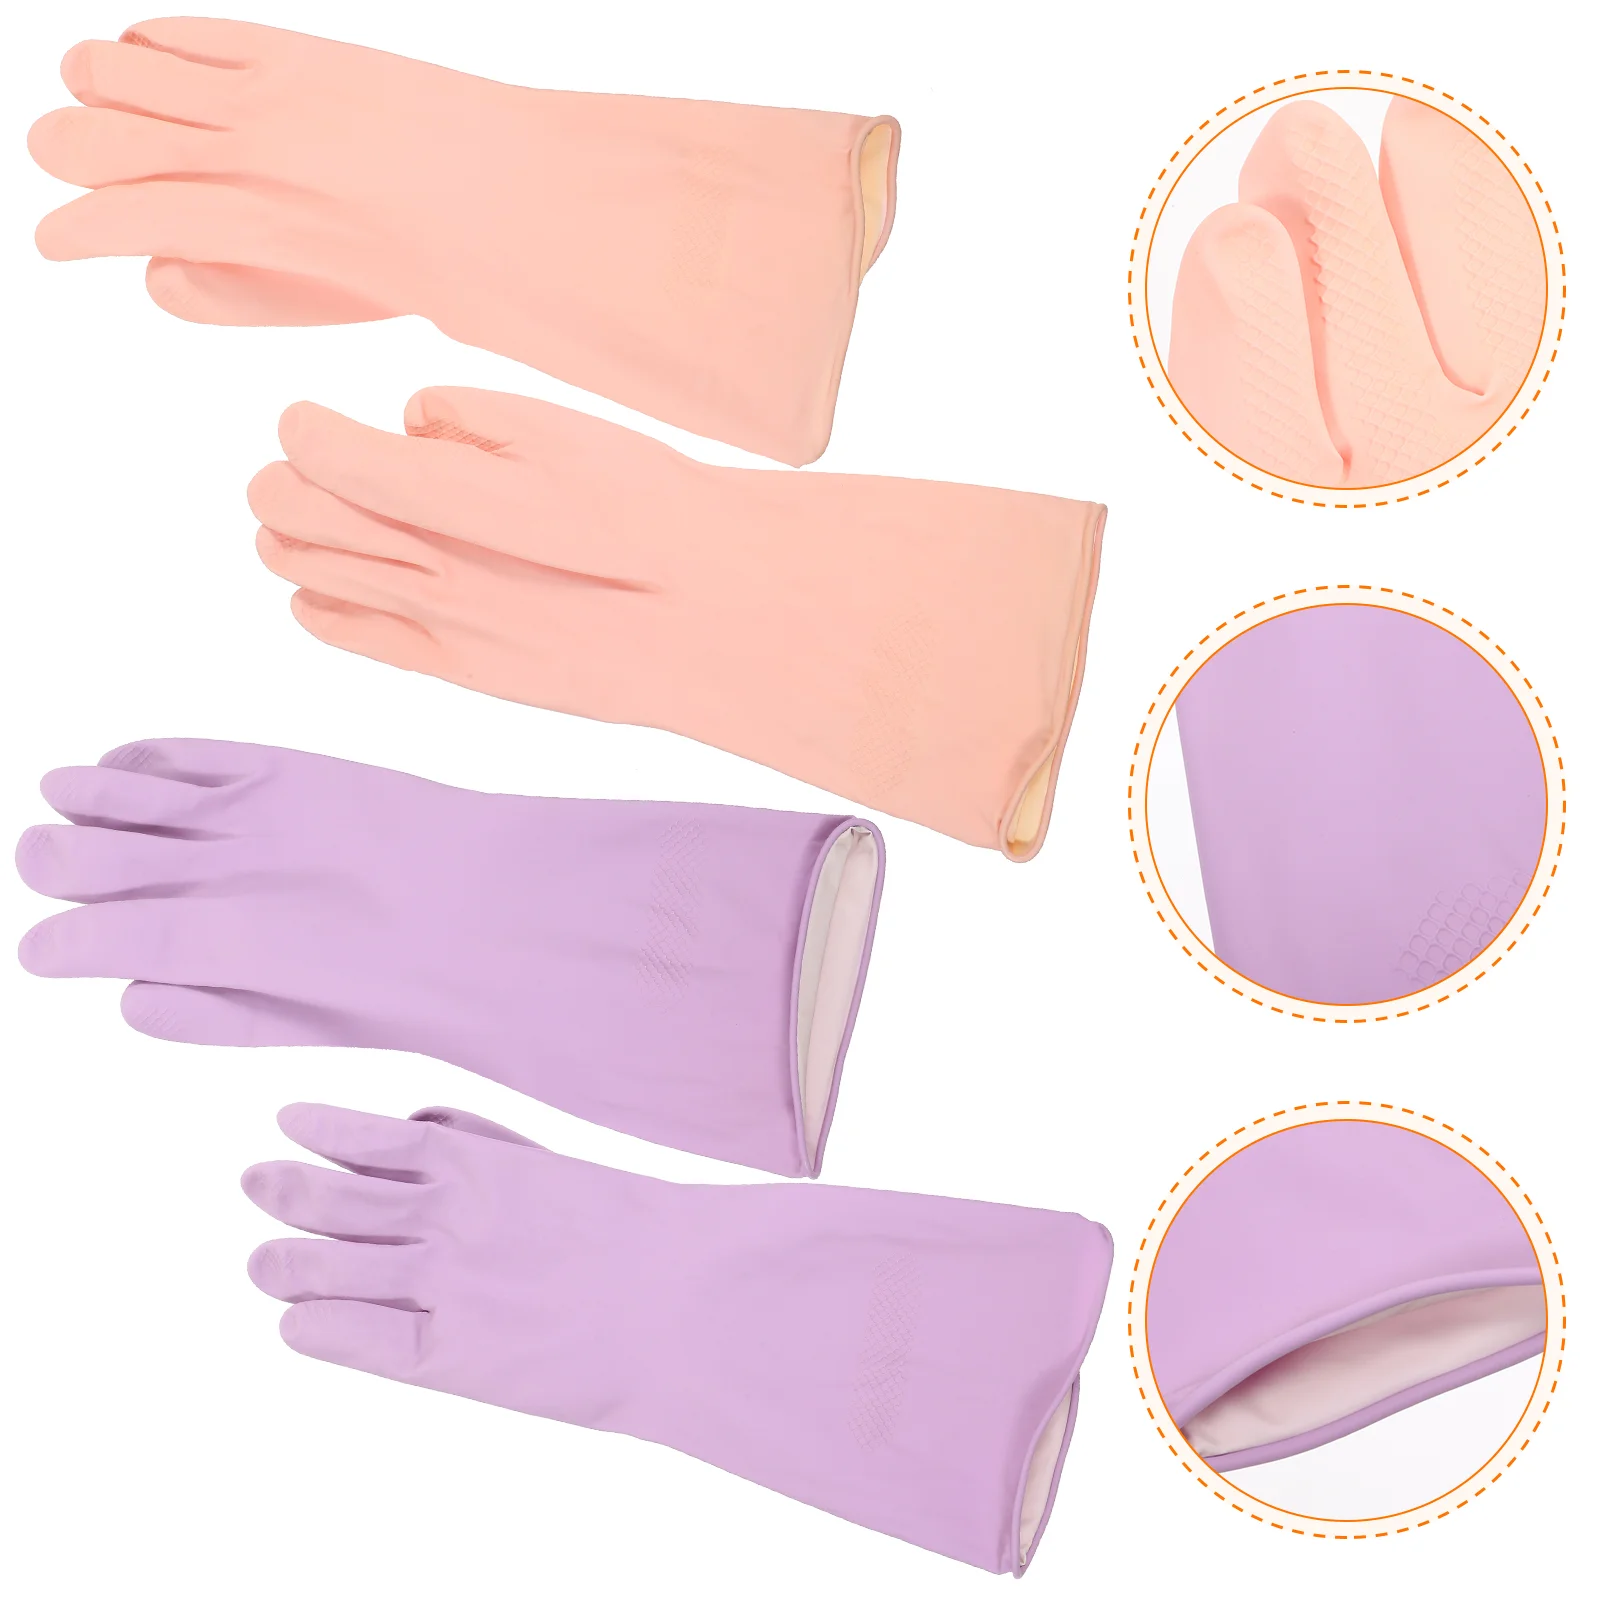 

2 Pairs of Latex Dishwashing Gloves Kitchen Cleaning Gloves Lengthened Housework Gloves Latex Gloves